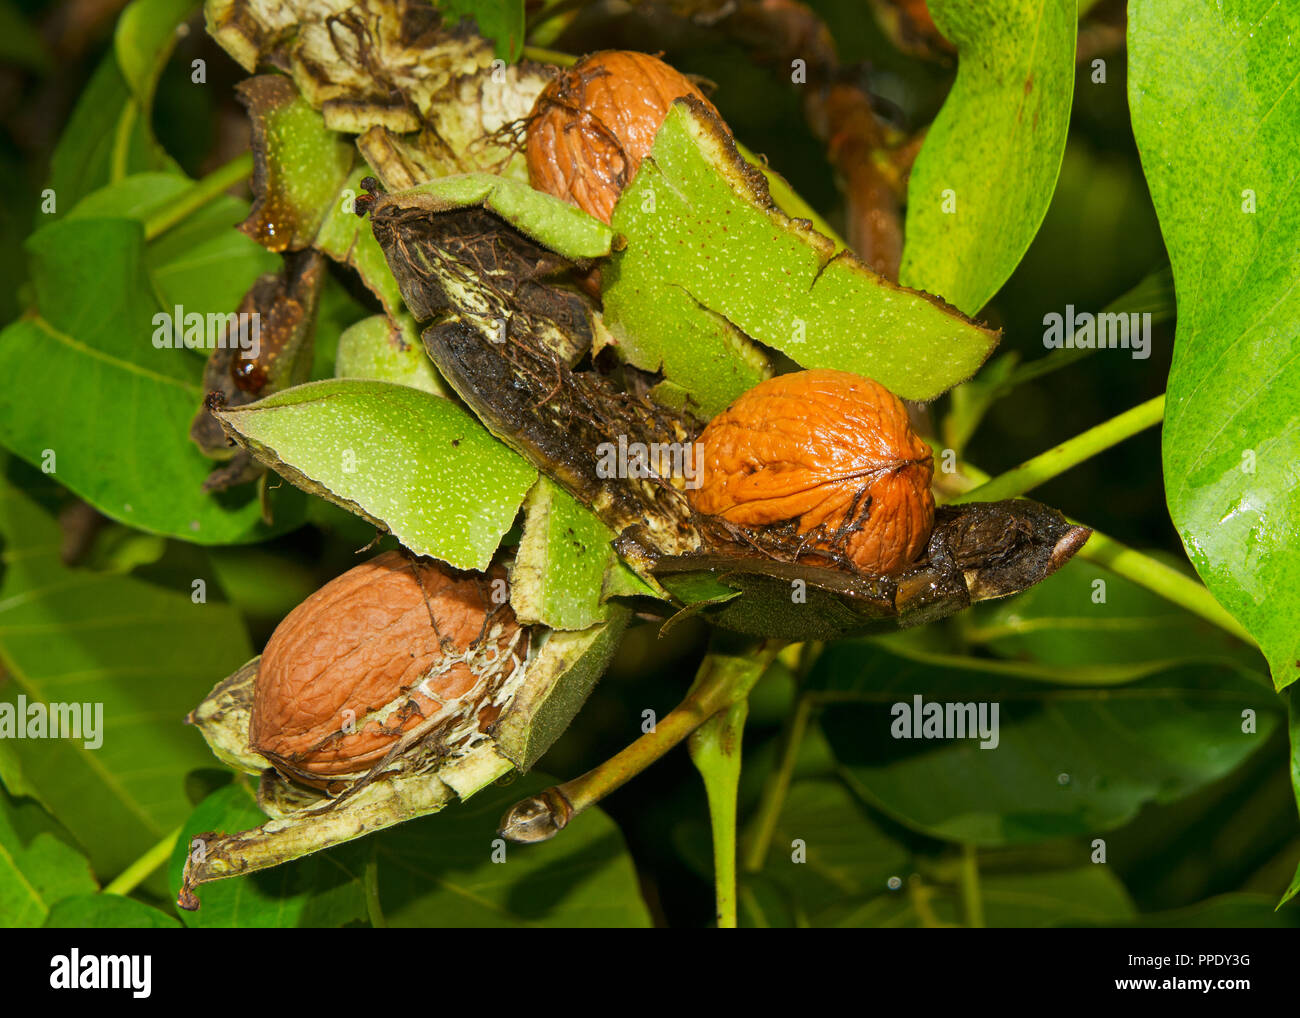 Ripe nuts of a Walnut tree, nuts, husks and leaves Stock Photo